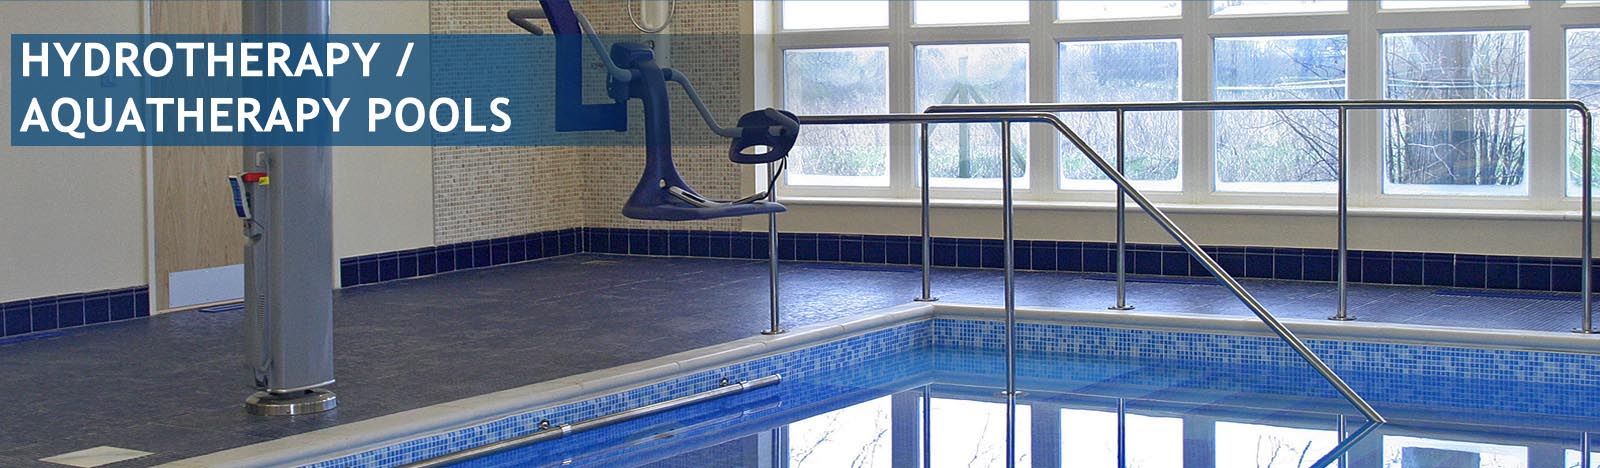 hydrotherapy pools installers wales